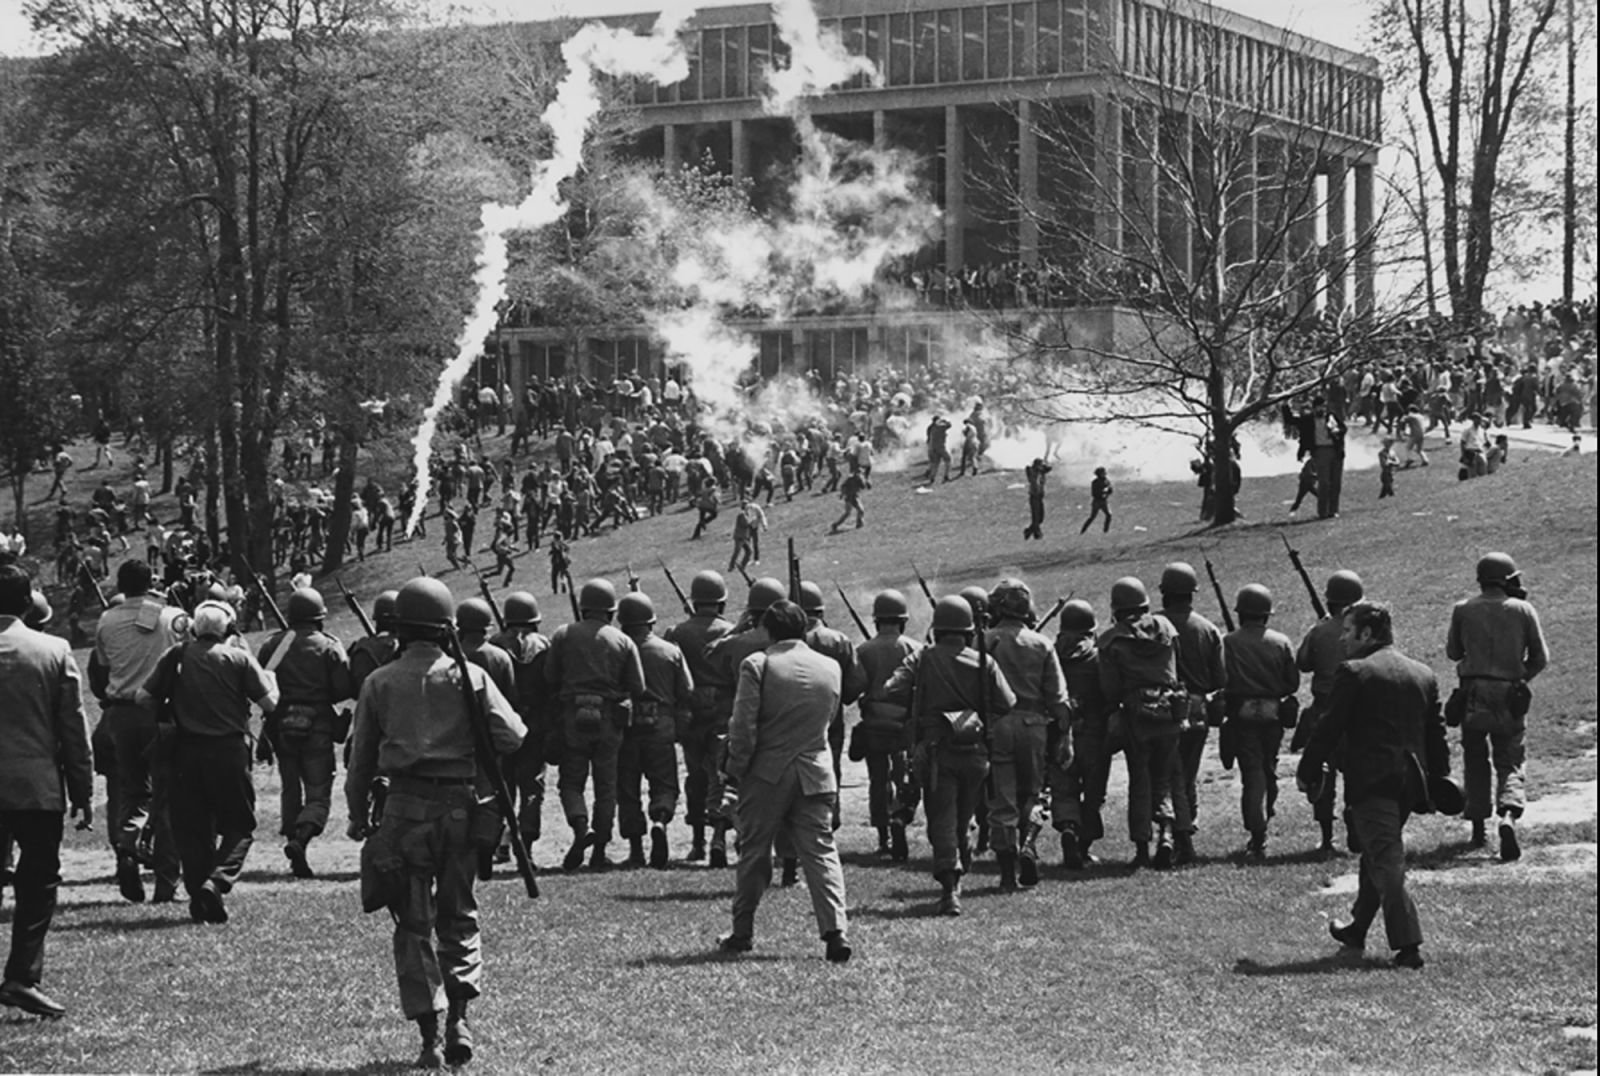 The Ohio National Guard is called in to disperse a rally scheduled for noon on May 4, 1970. Shortly after the protest begins, guardsmen fire tear gas at the students. Some students later said they were surprised the guardsmen followed them as they ran away from the tear gas. The guardsmen were clearly armed, but many students said they believed their weapons were not loaded with live ammunition.Kent State University News Service